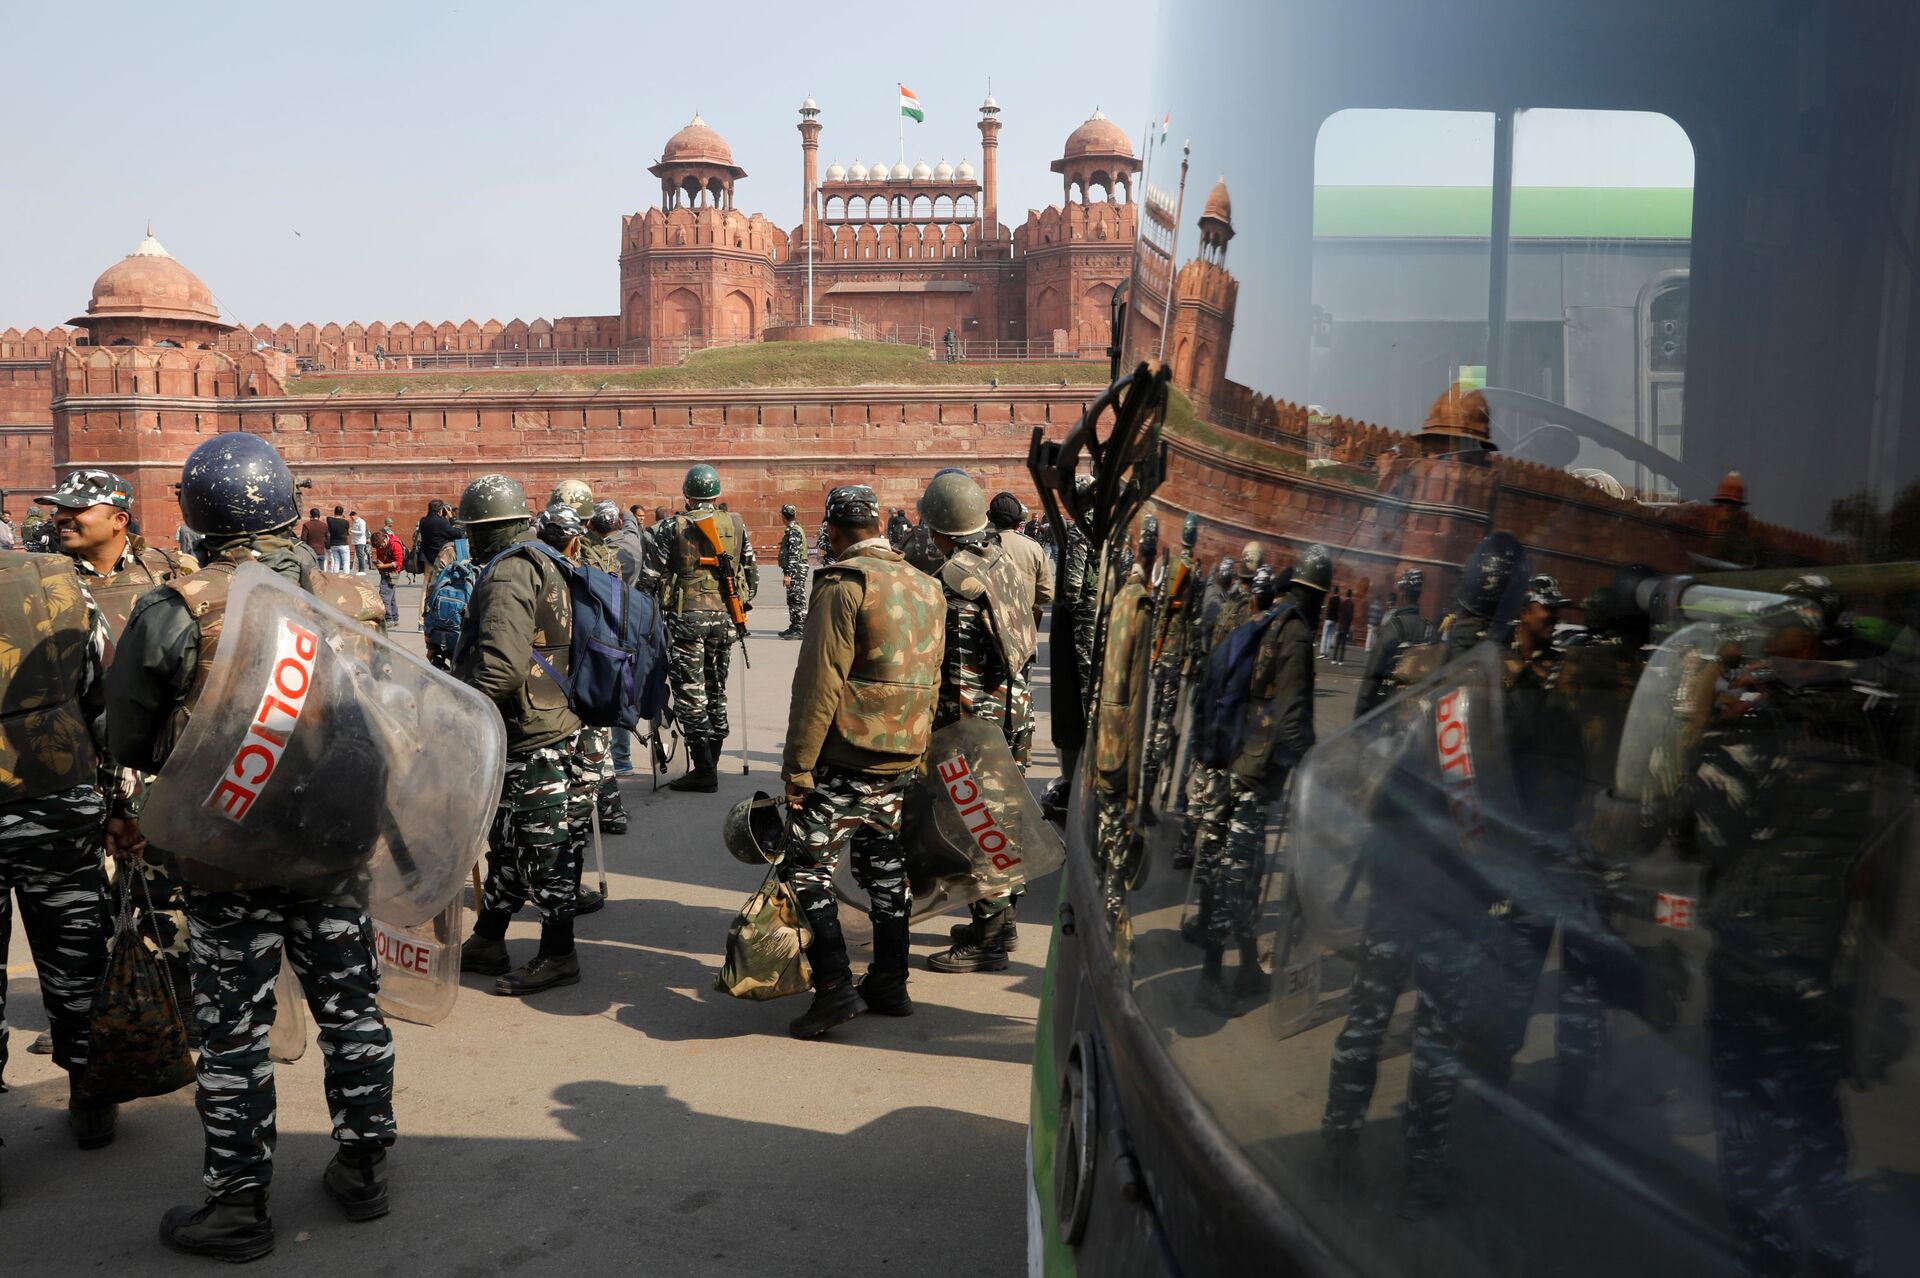 Policemen in riot gear stand guard in front of the historic Red Fort after Tuesday's clashes between police and farmers, in the old quarters of Delhi, India, January 27, 2021. REUTERS/Adnan Abidi - Sputnik International, 1920, 07.09.2021